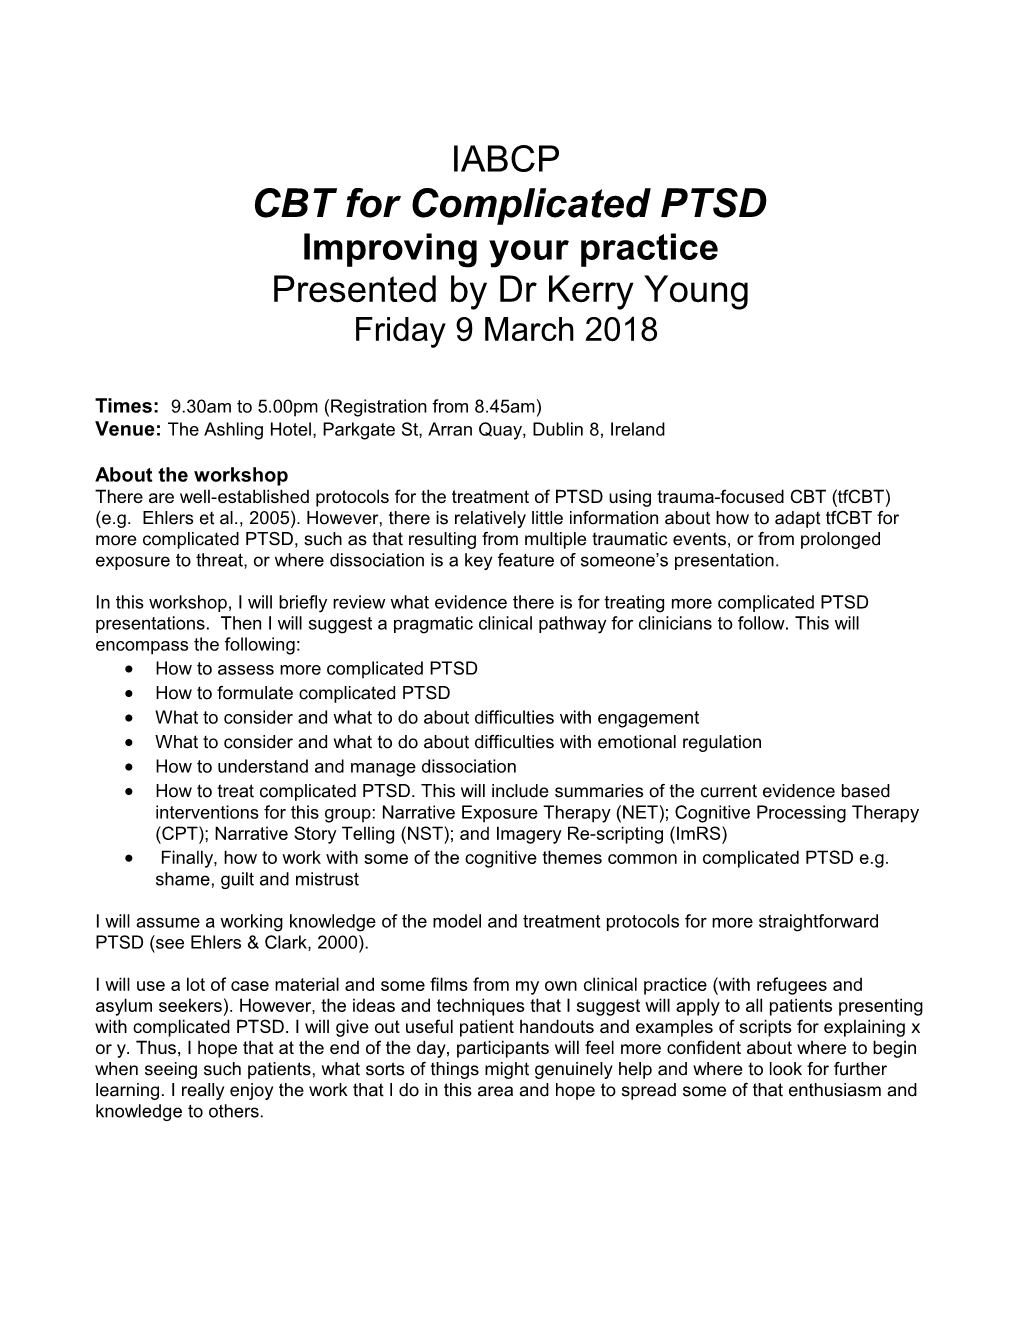 CBT for Complicated PTSD